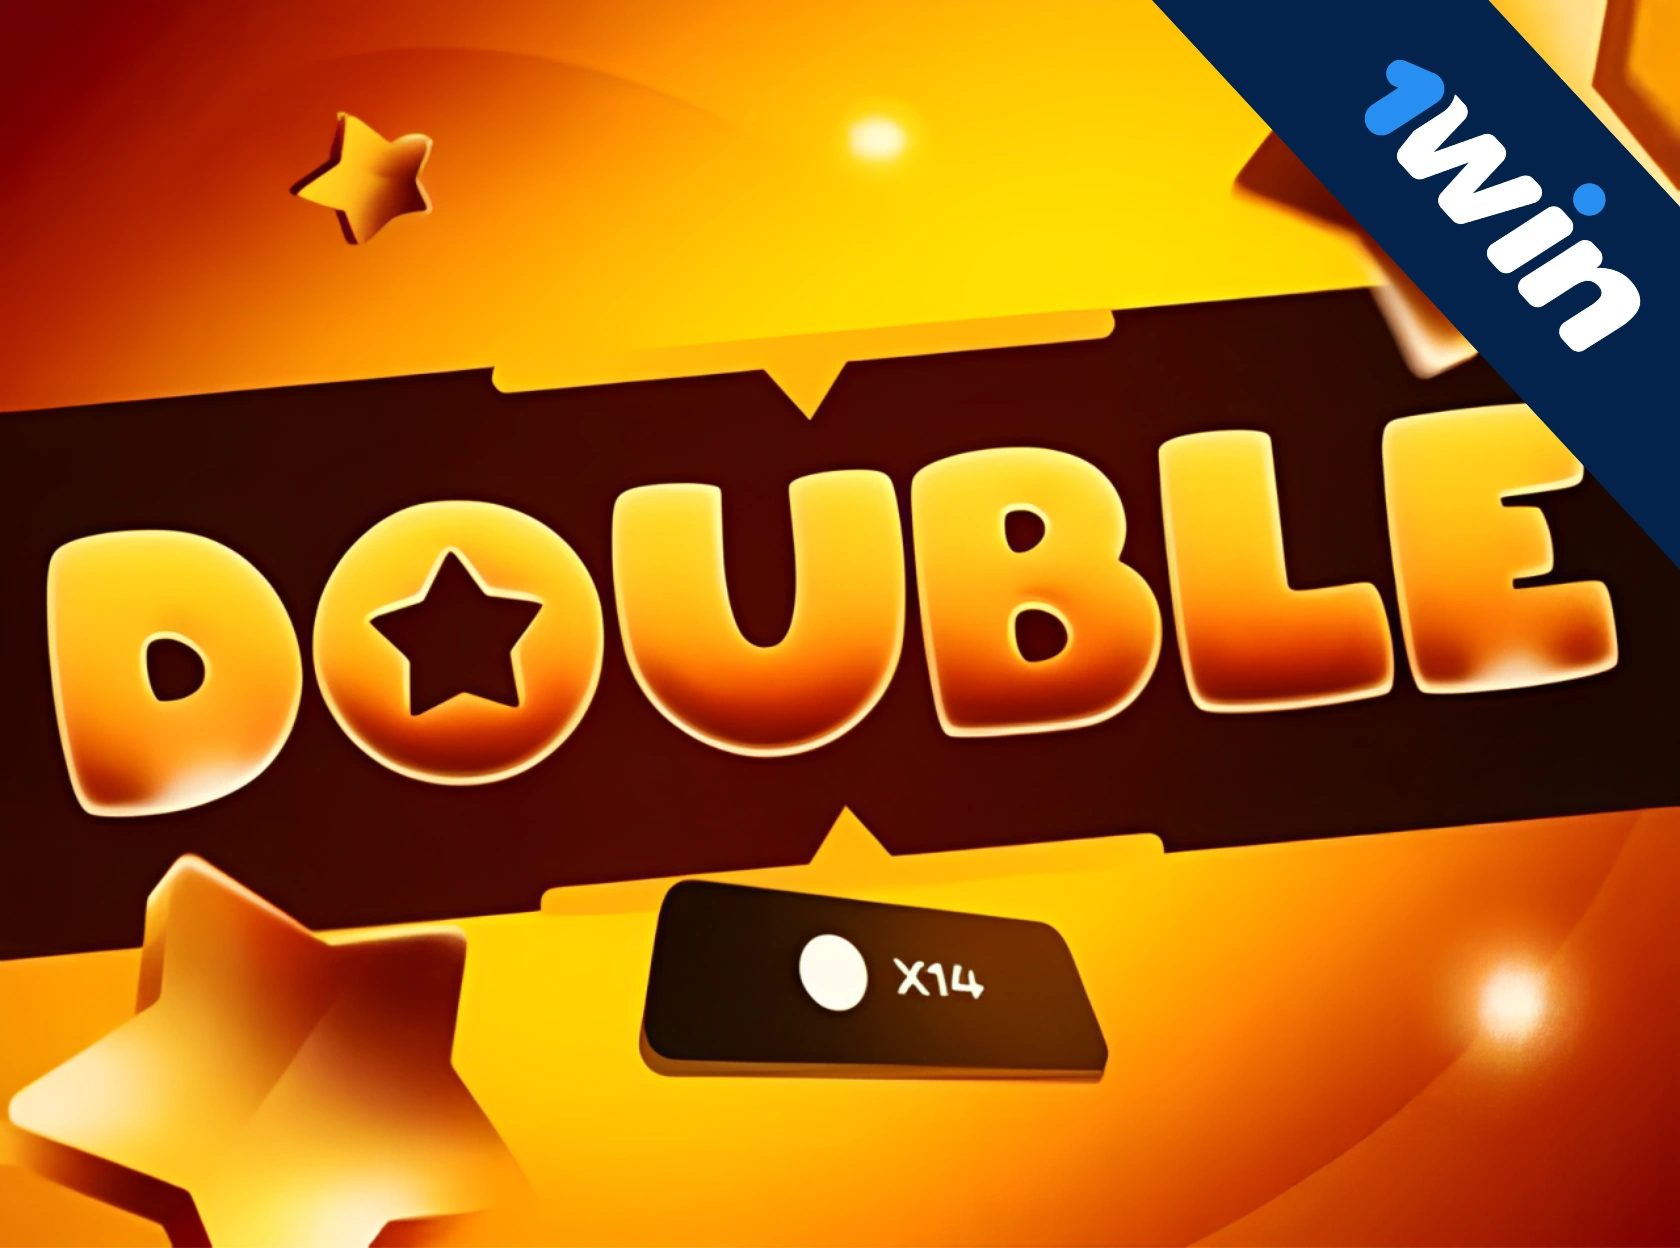 Double 1win is a new exclusive game!